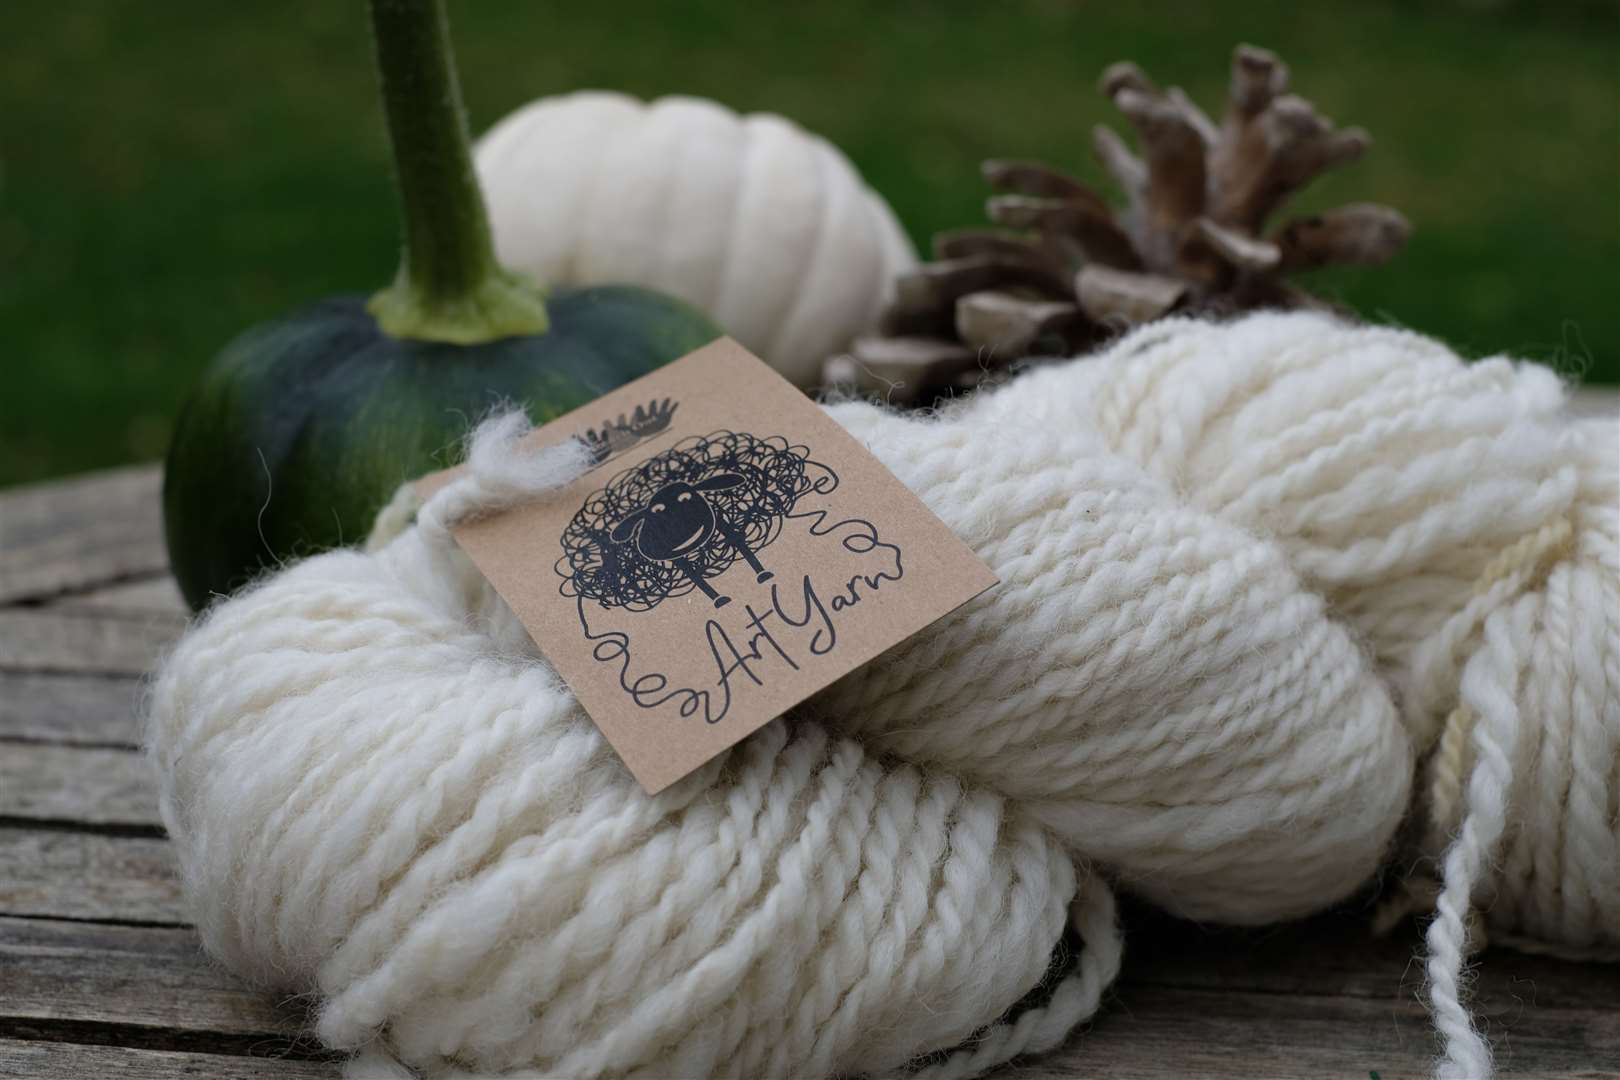 Highland produced wool from Loch Ness Knitting.